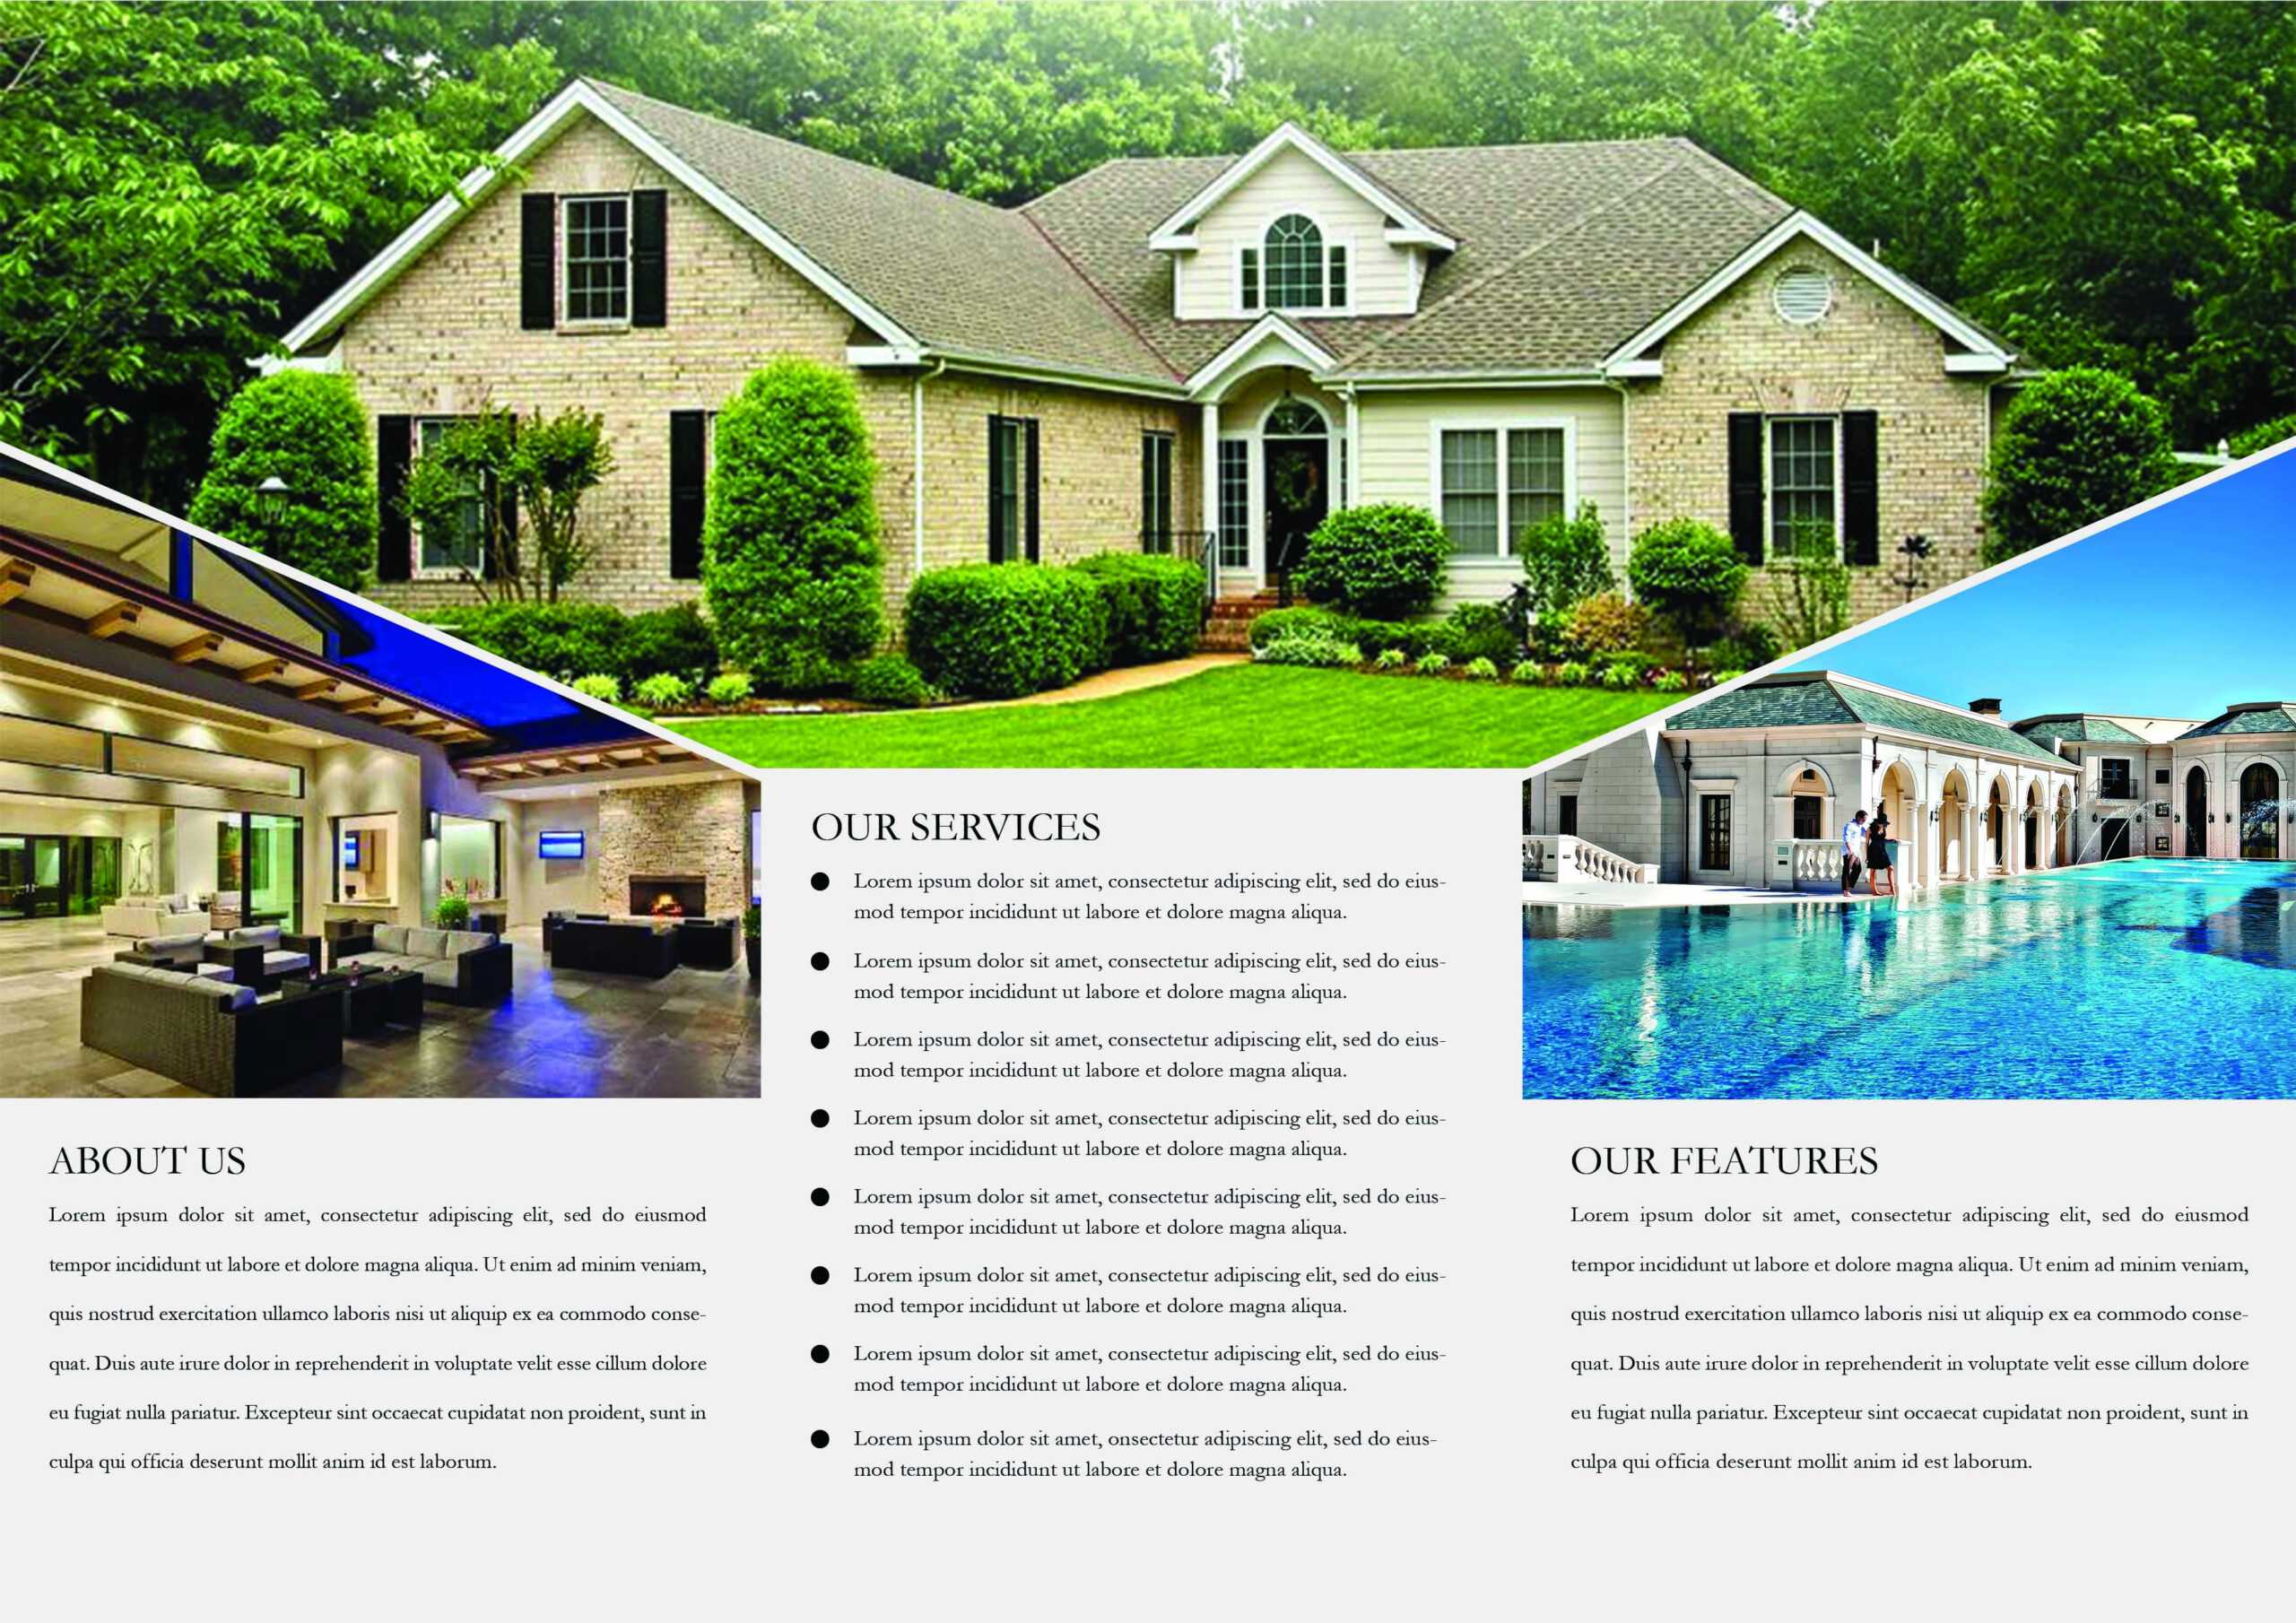 65+ Print Ready Brochure Templates Free Psd Indesign & Ai For Real Estate Brochure Templates Psd Free Download